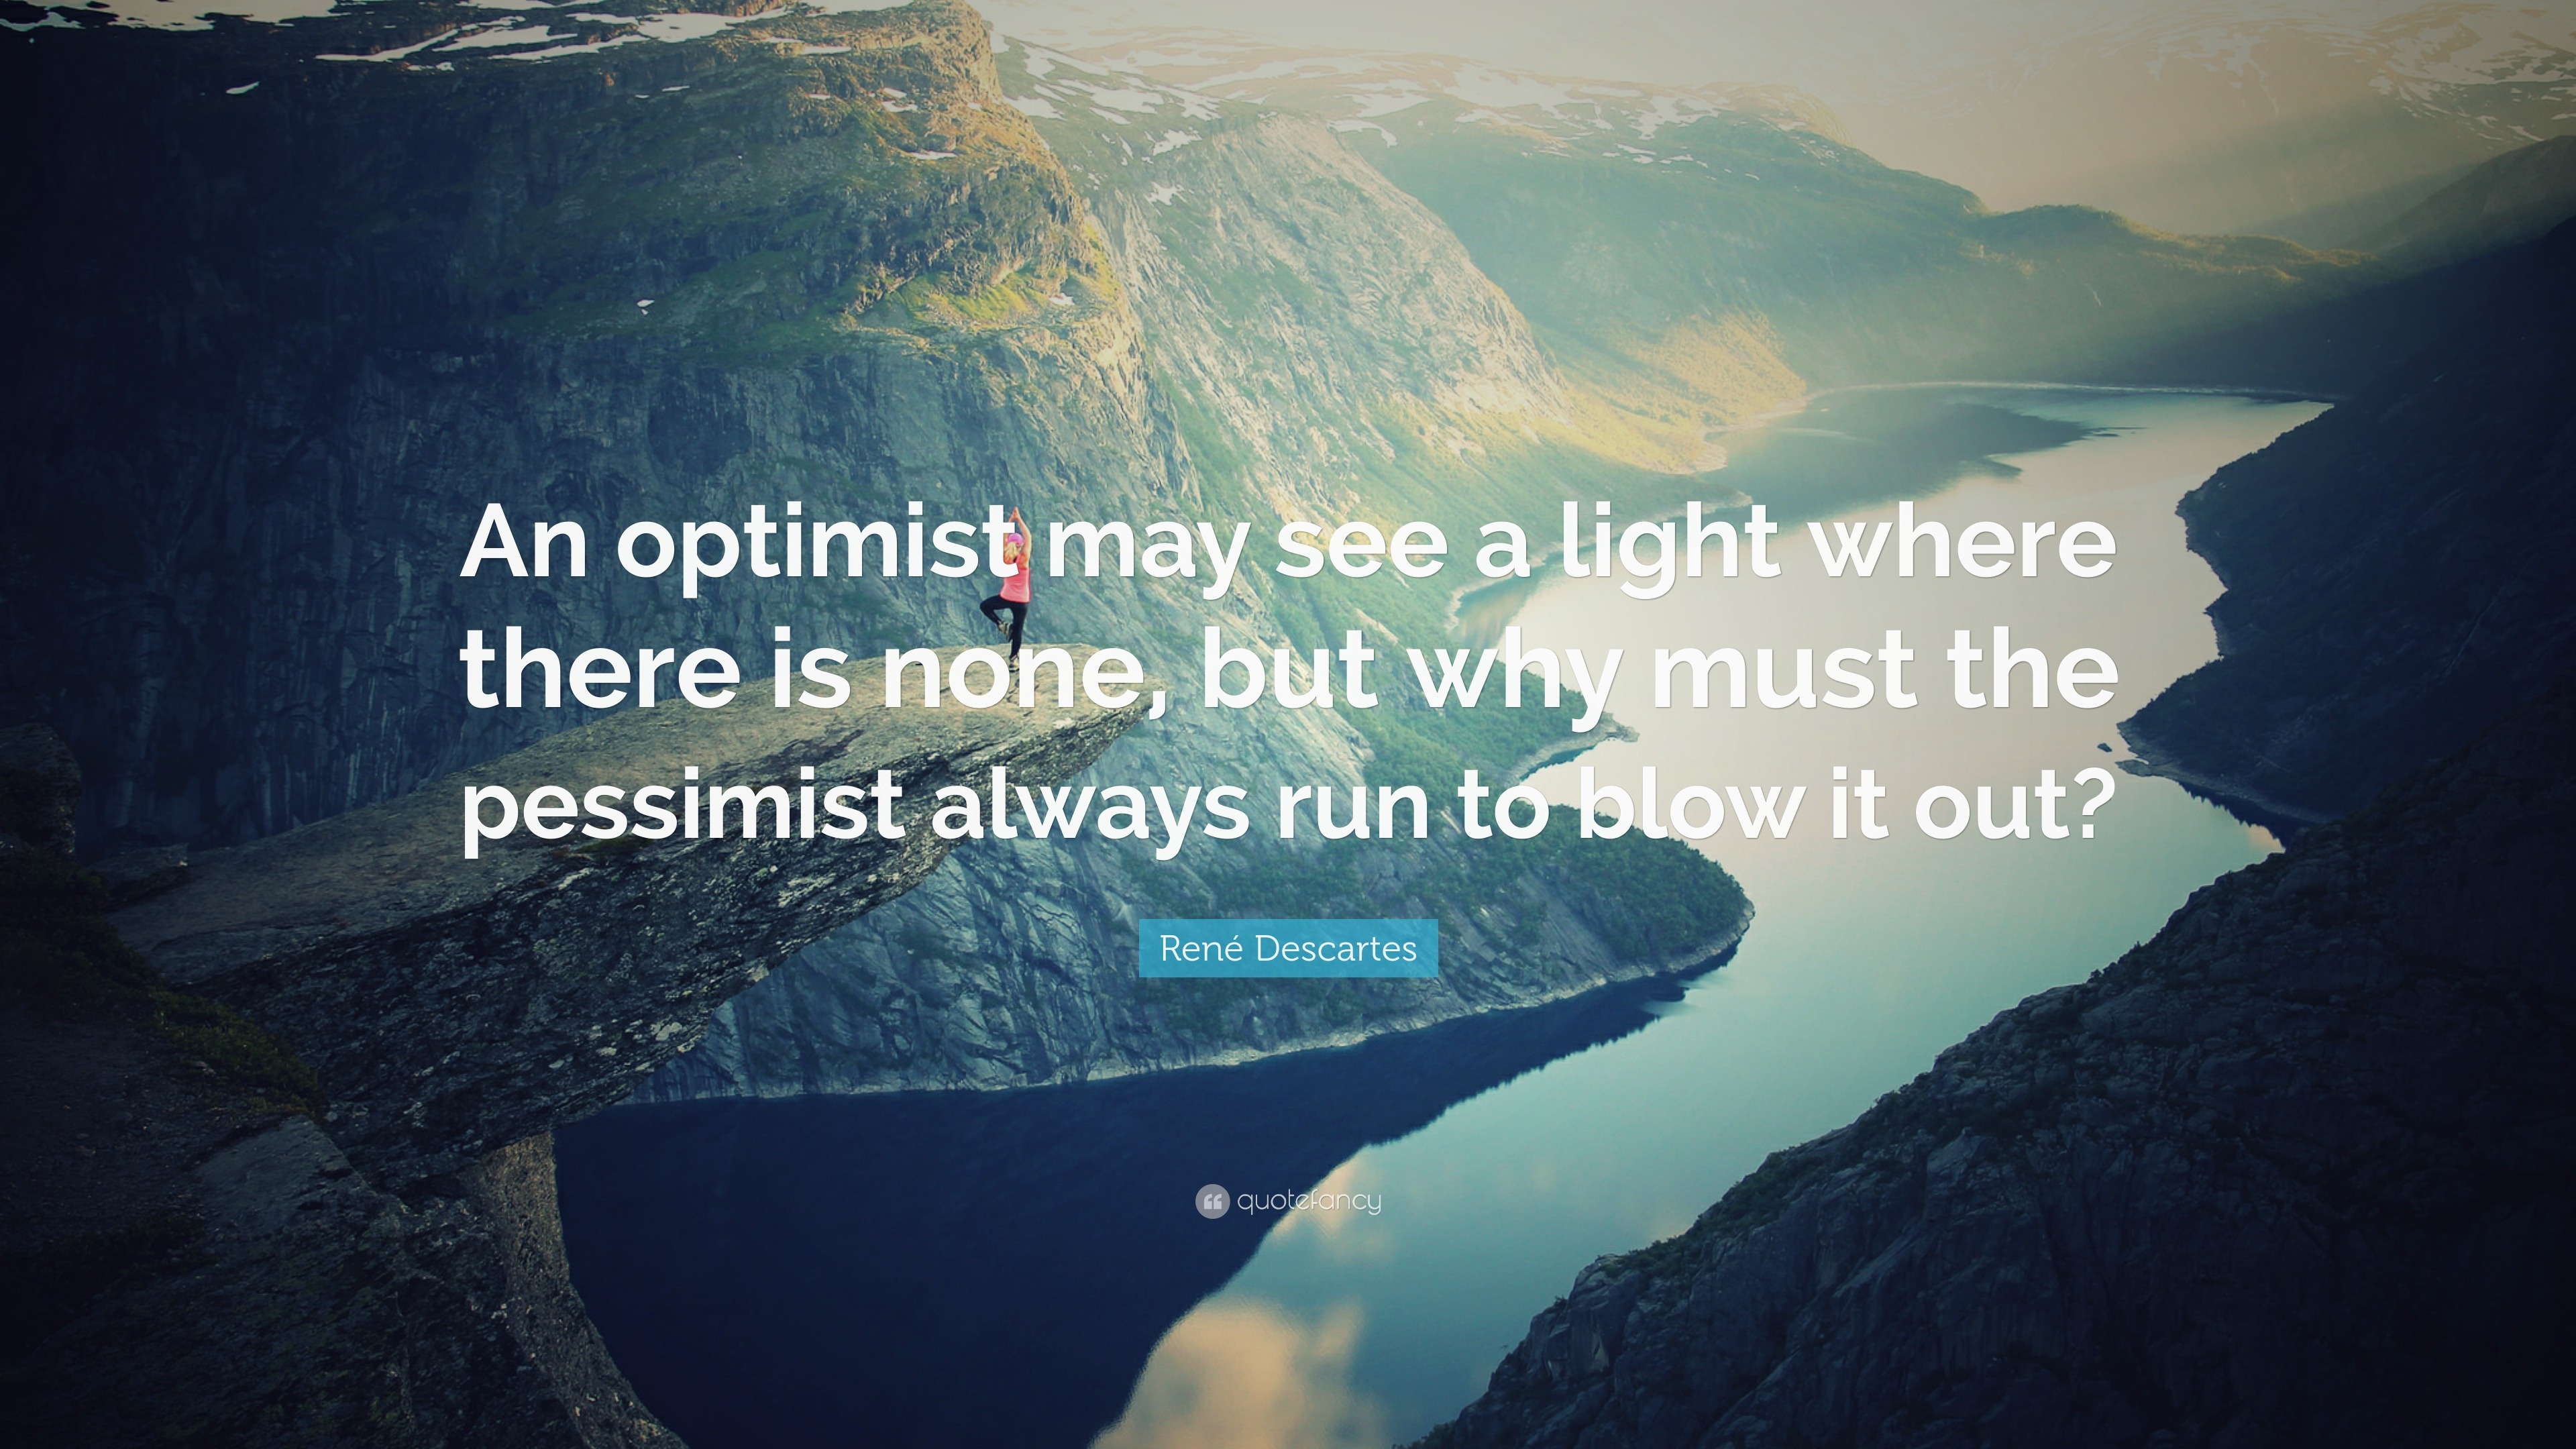 René Descartes Quote: “An optimist may see a light where there is none